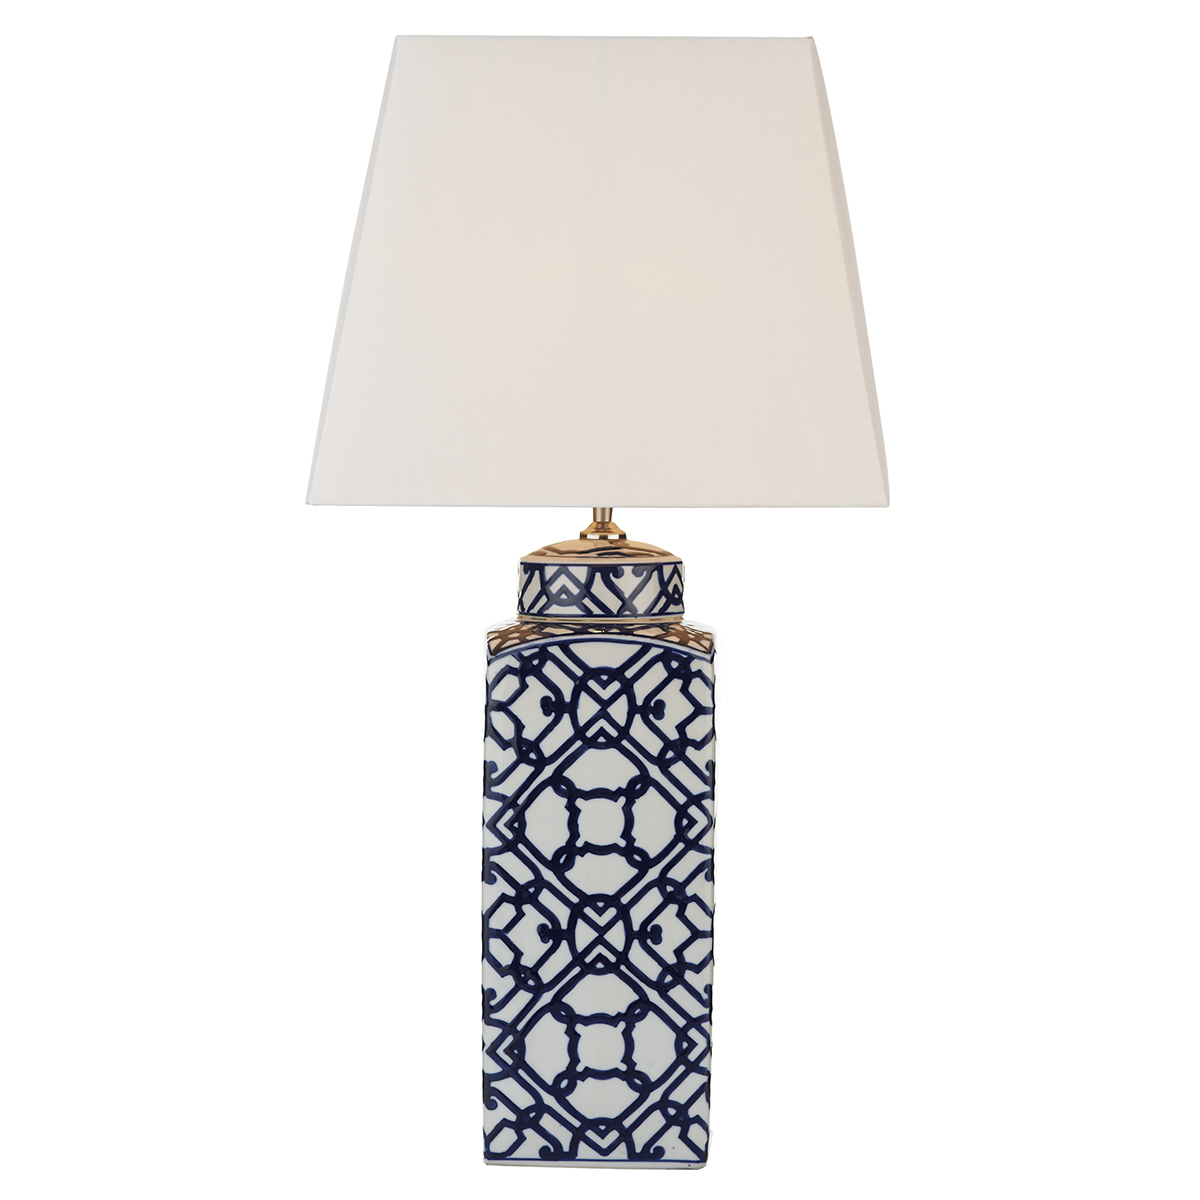 Mystic Table Lamp Blue White Base Only, Blue And White Ceramic Base Table Lamp